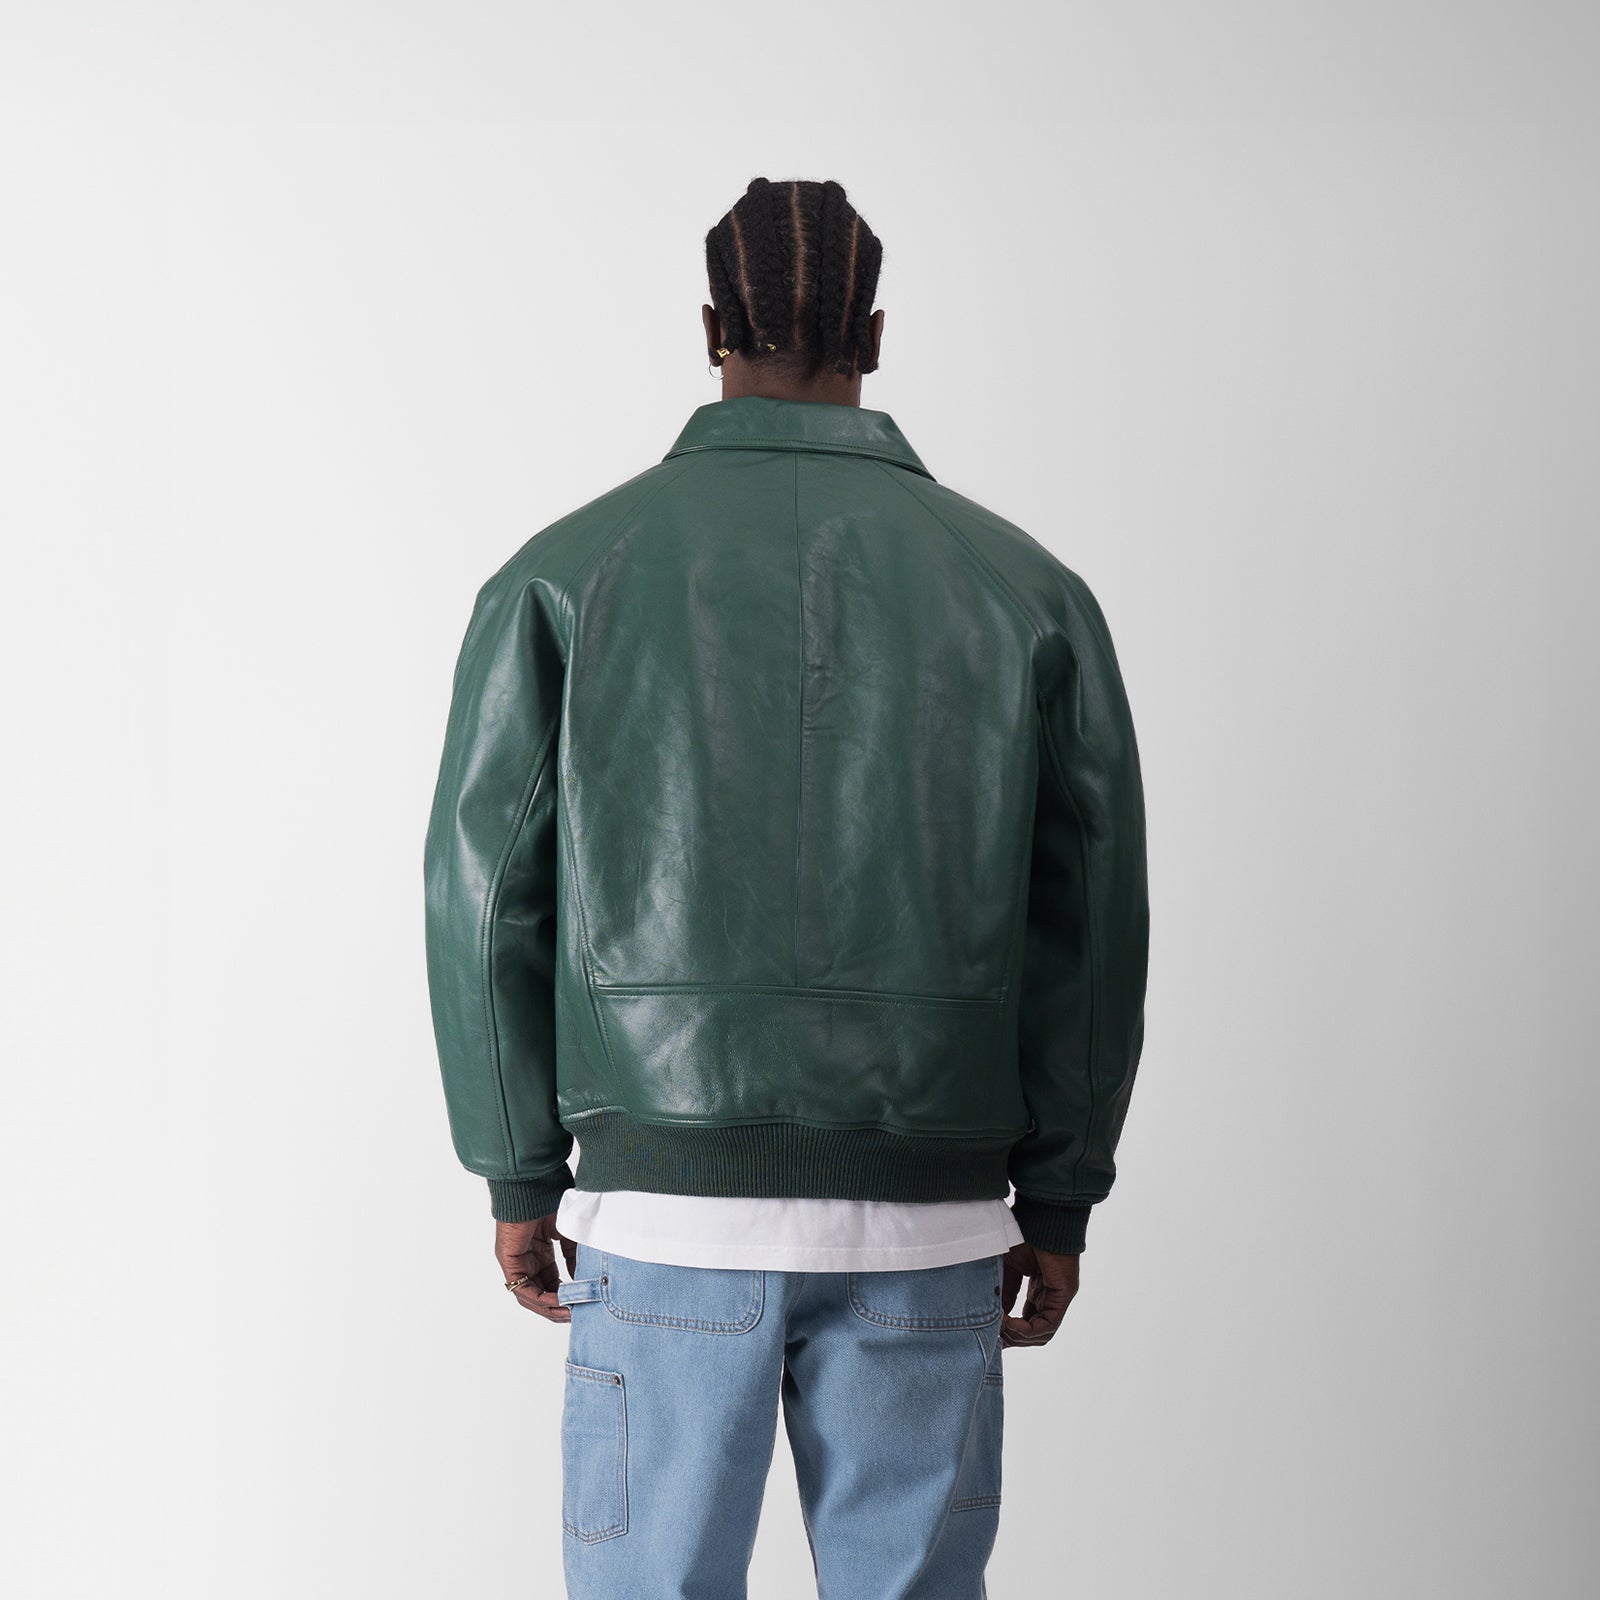 SOURCE LEATHER JACKET - HUNTER GREEN